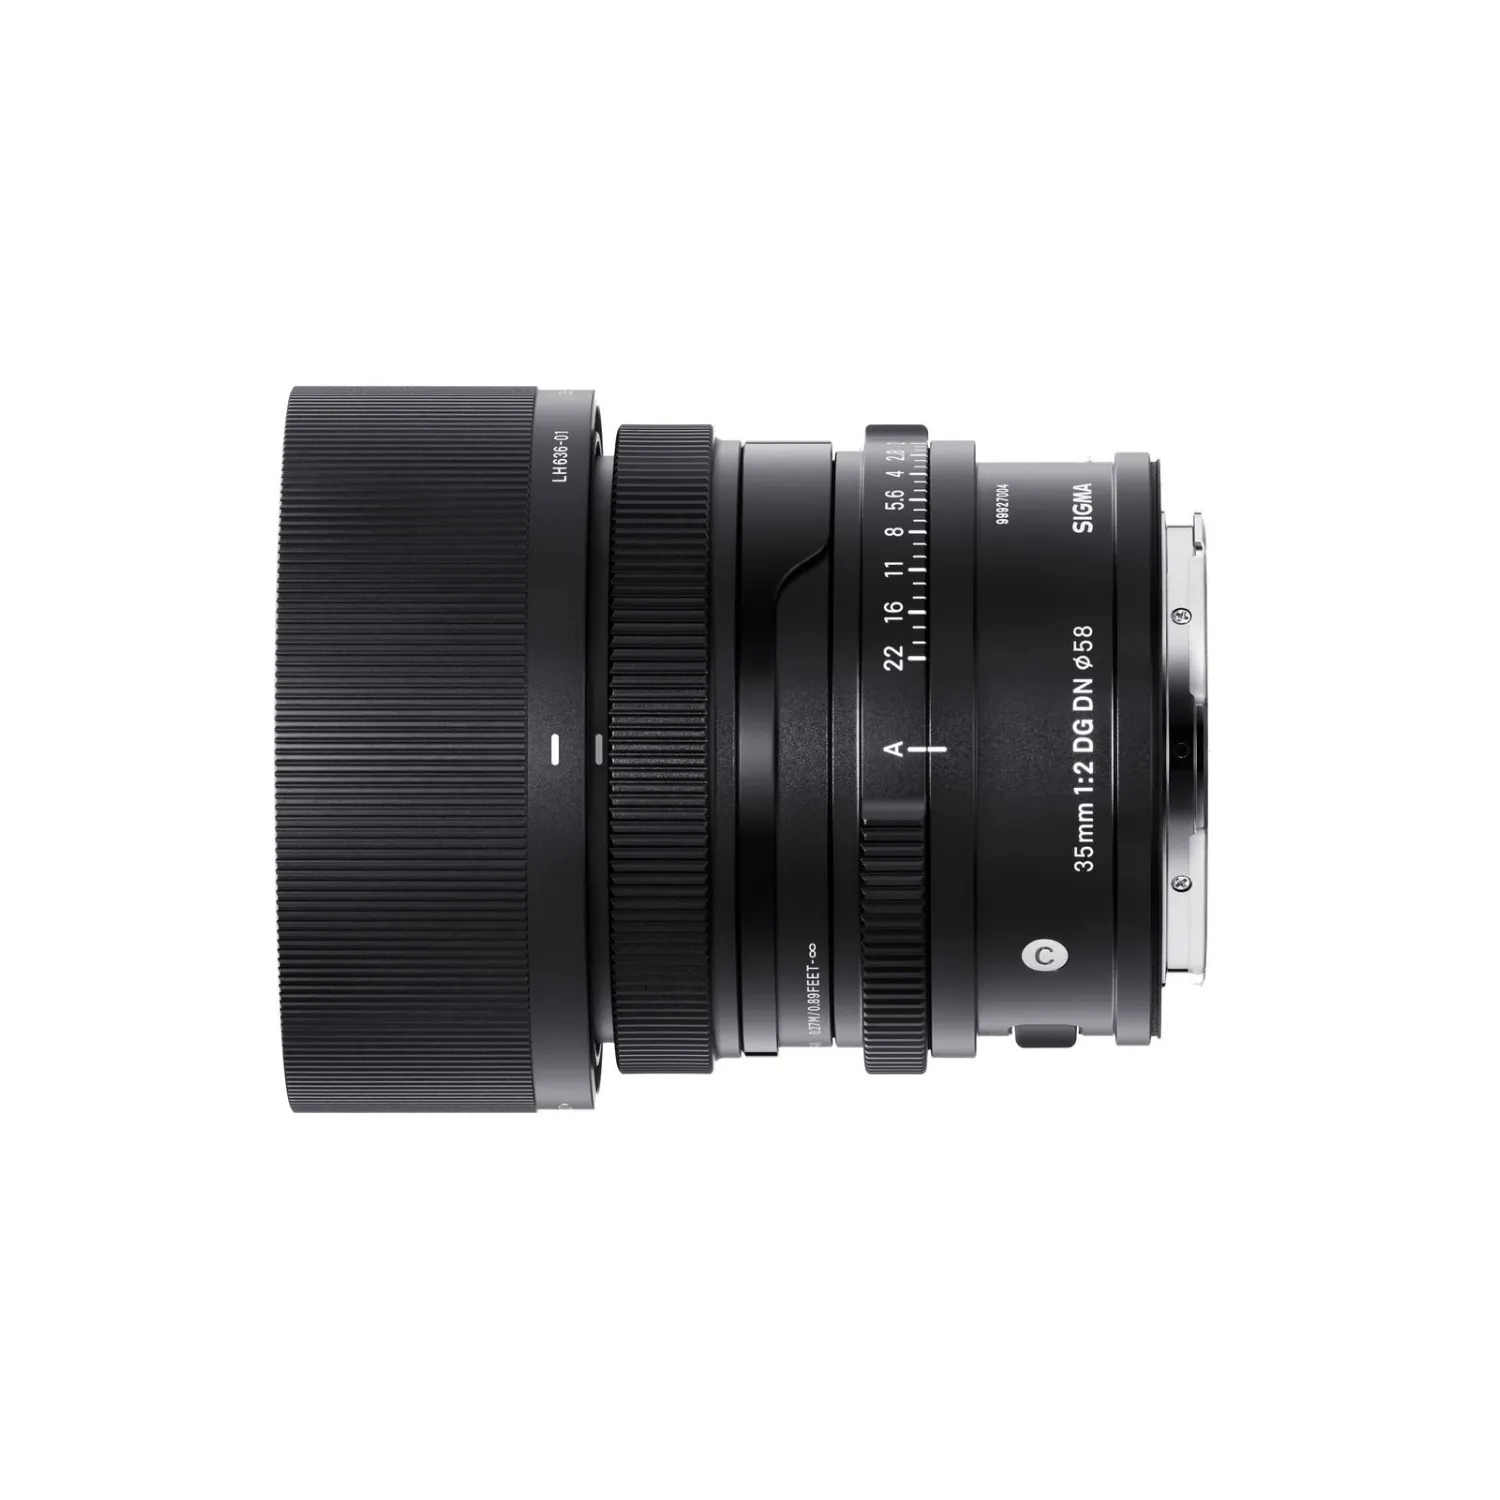 Sigma 35mm f/2 DG DN Contemporary Lens for L-Mount